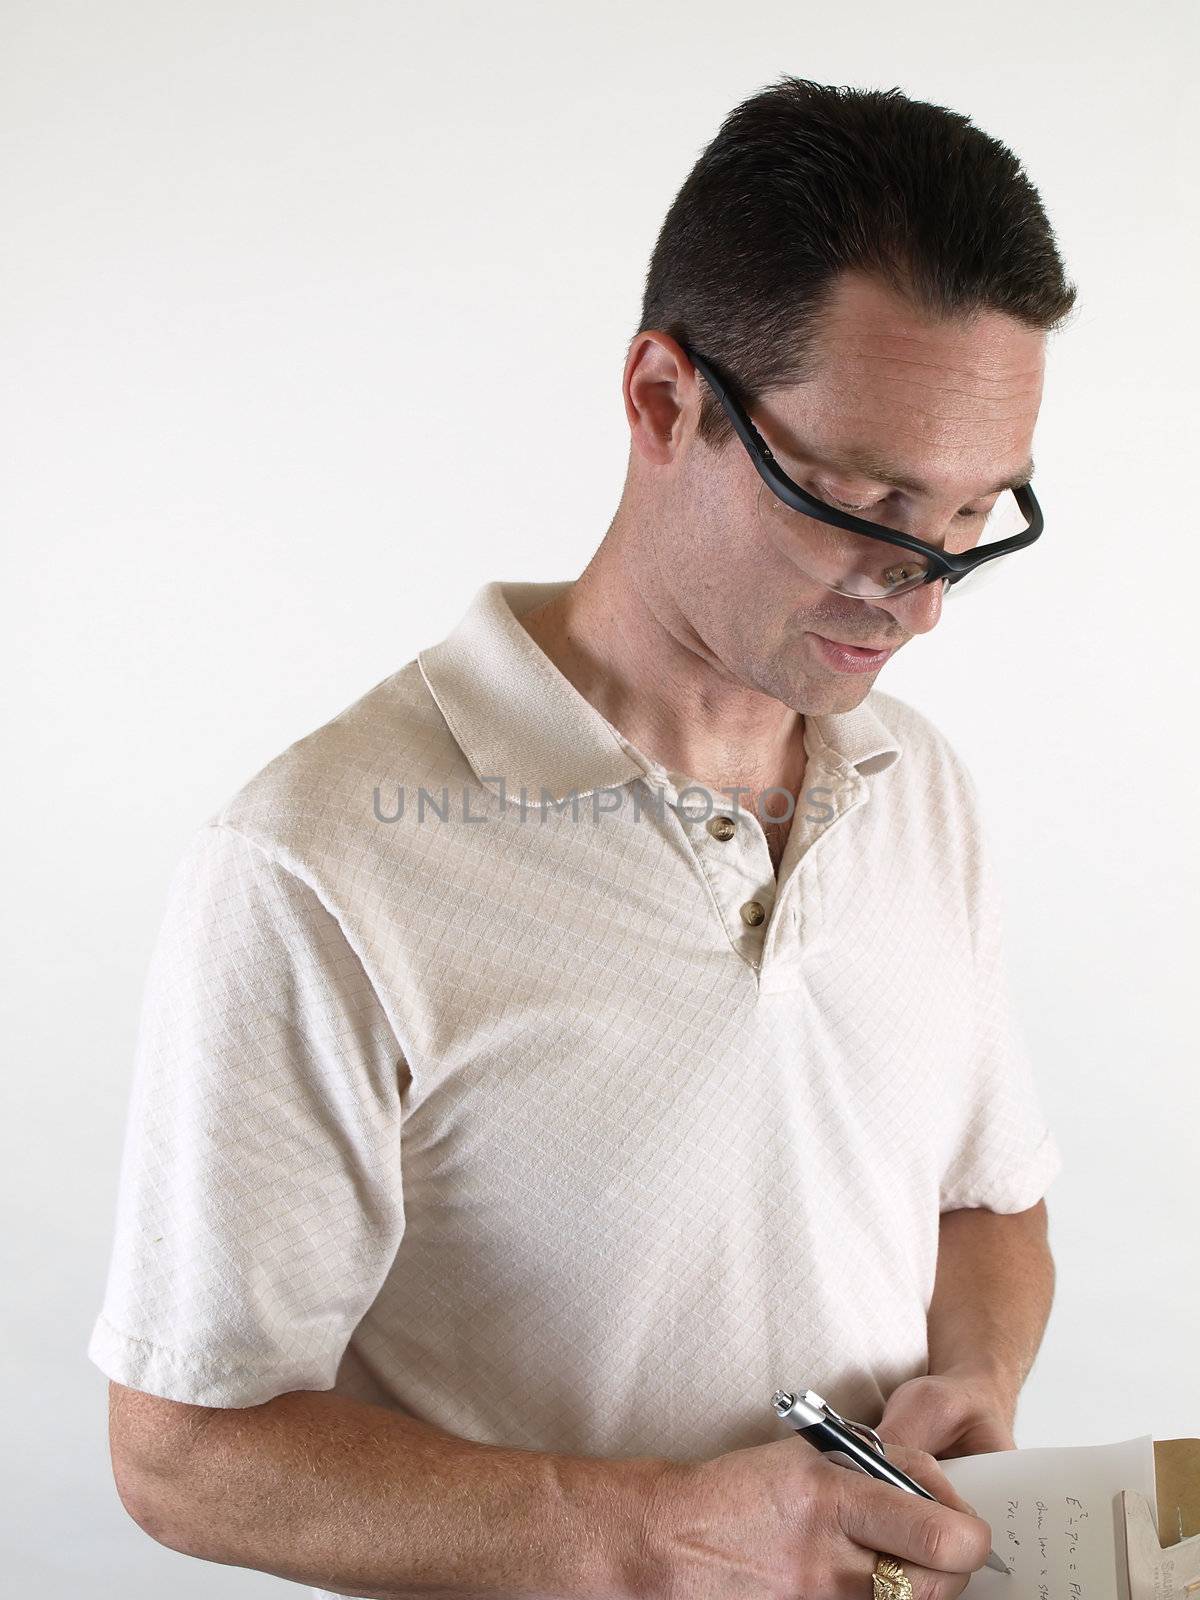 A male wearing safety glasses writes a note on a clipboard.